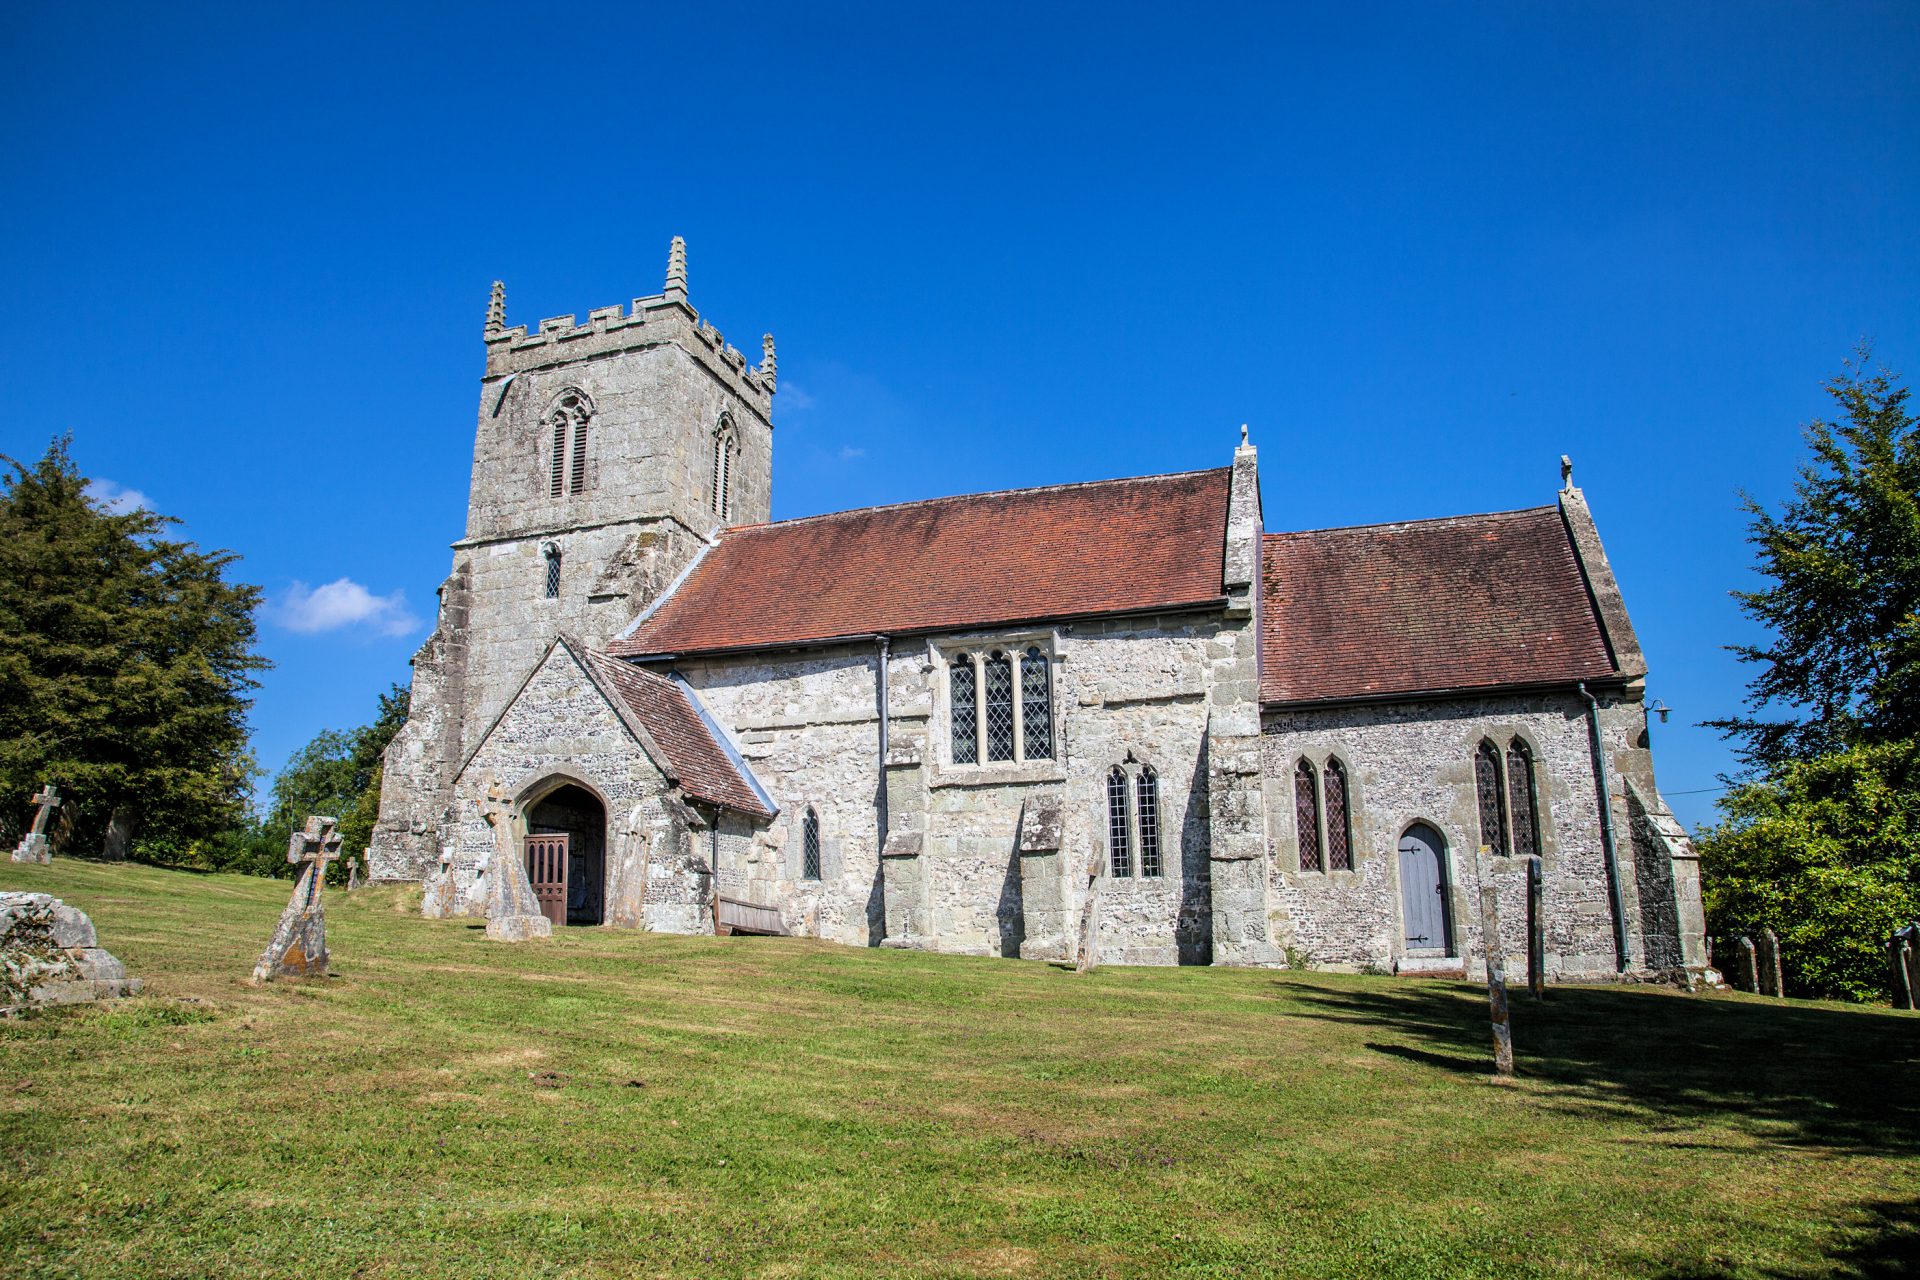 A view of the Church and Churchyard